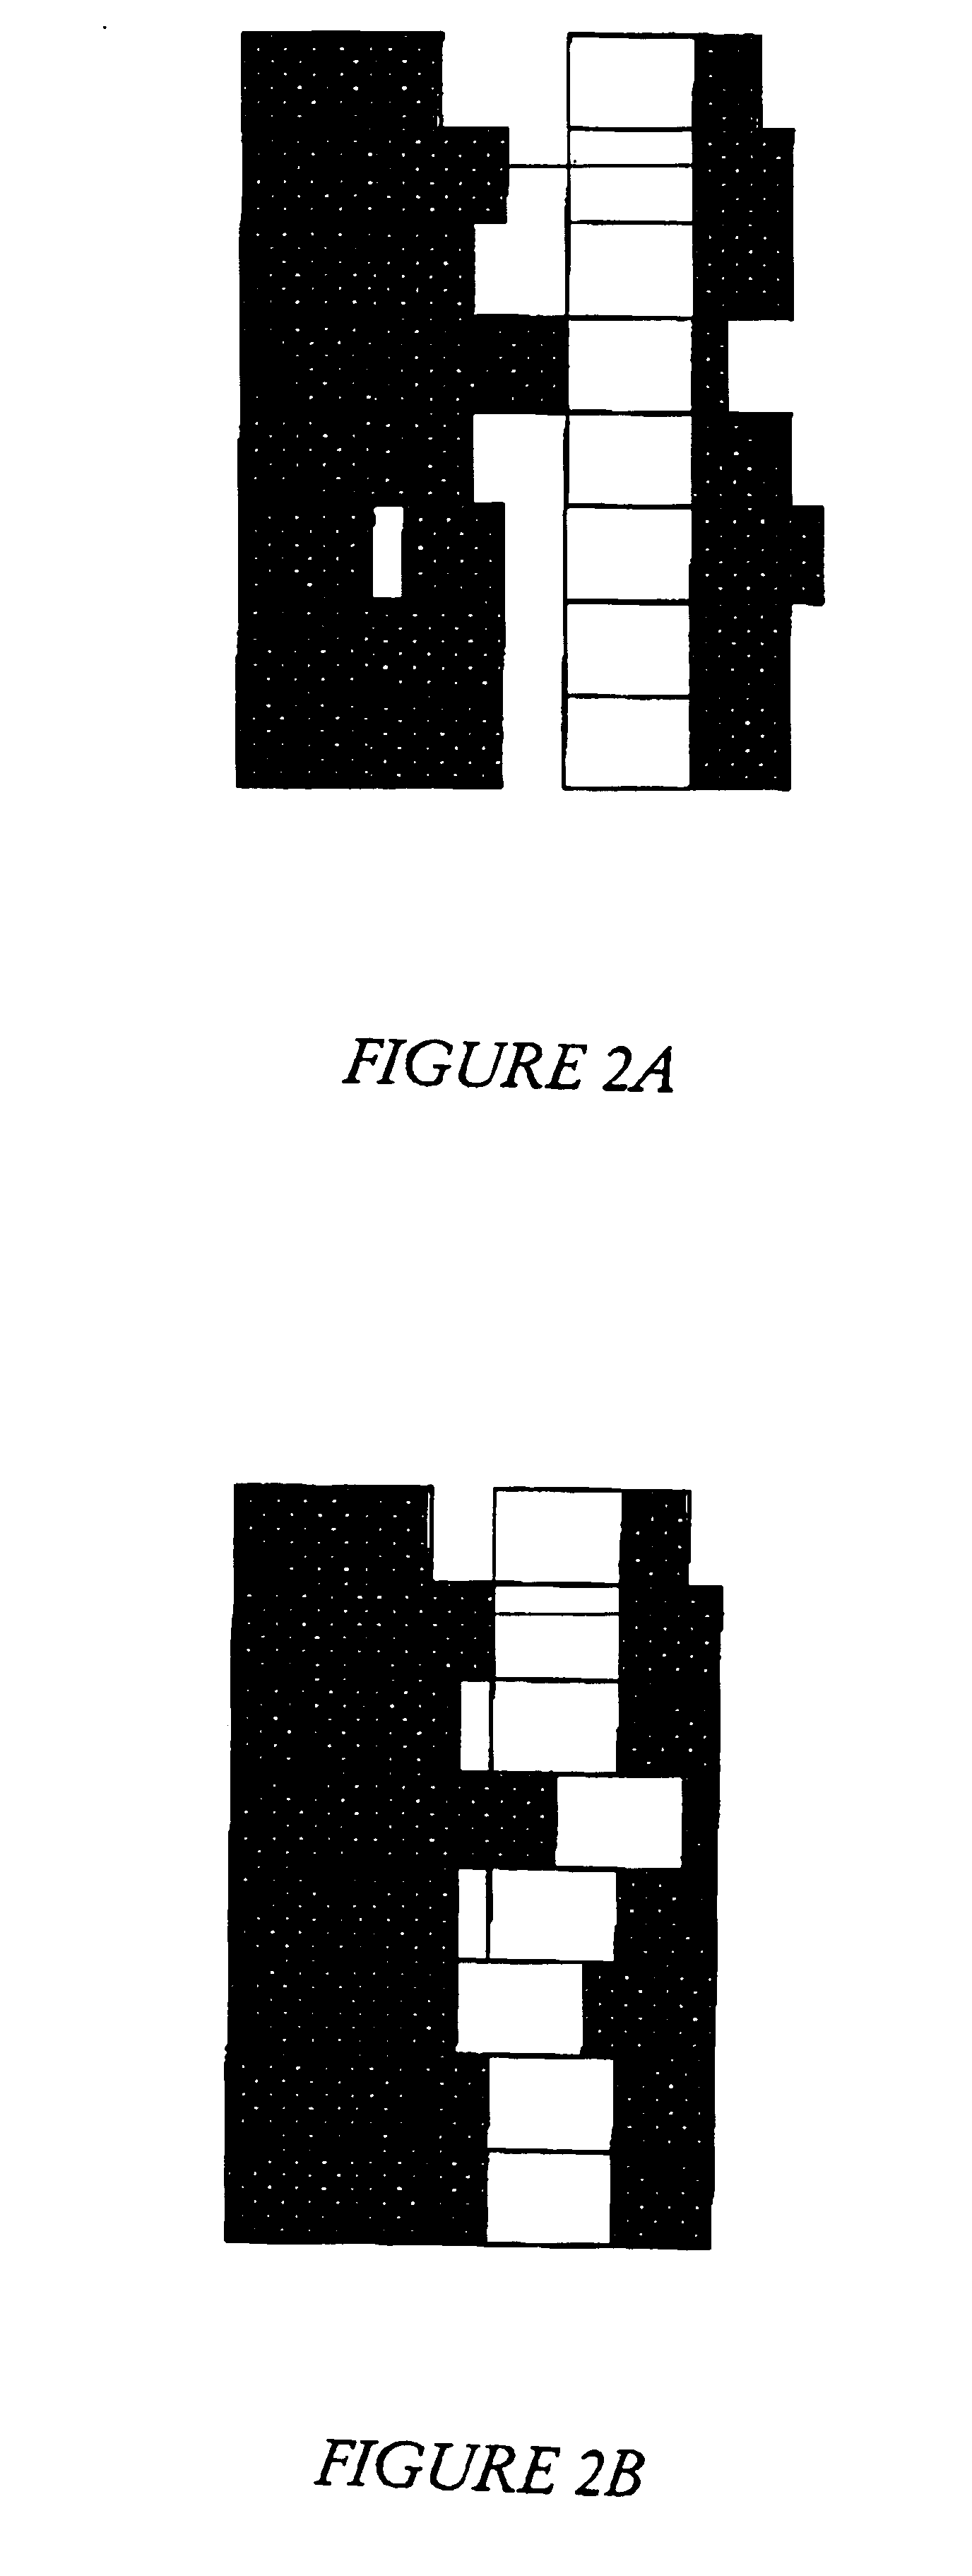 Method and apparatus of relative datapath cell placement with structure bonding